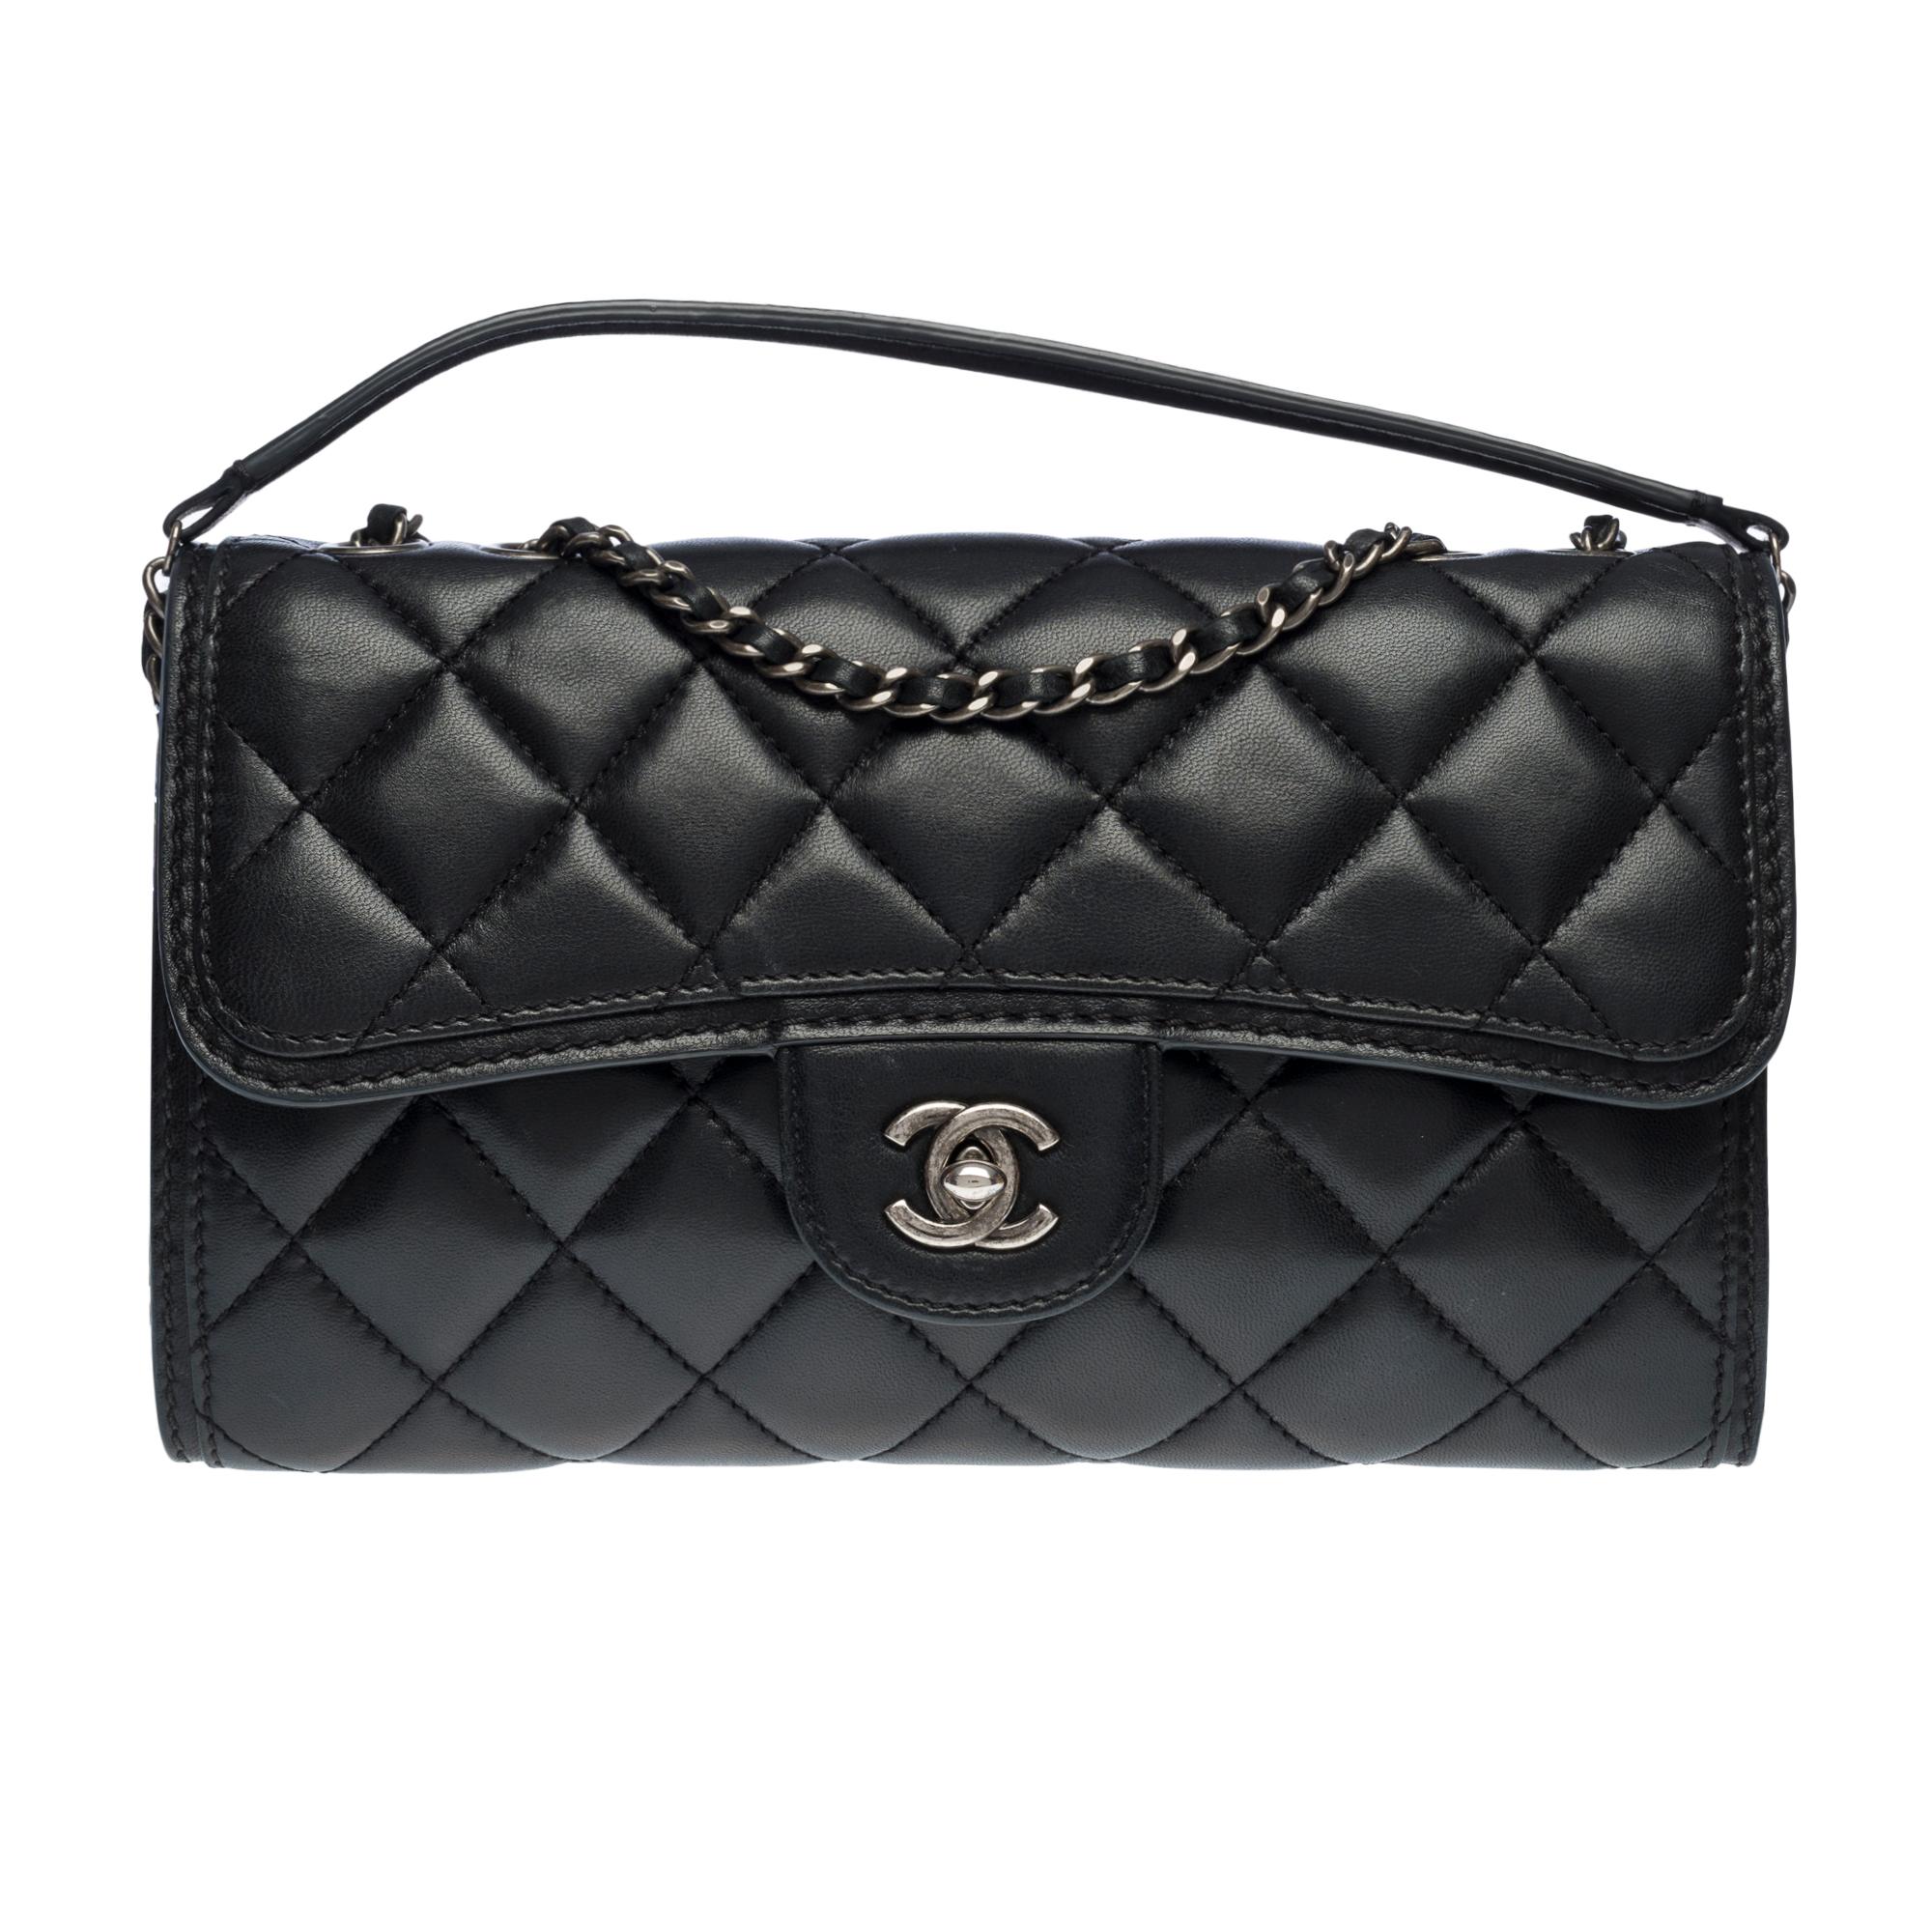 Lovely Chanel Classic shoulder flap bag in black quilted lambskin leather, ruthenium metal hardware, a ruthenium metal chain handle interlaced with black leather for a hand, shoulder or crossbody carry

Pocket on the back of the bag
Flap closure, CC